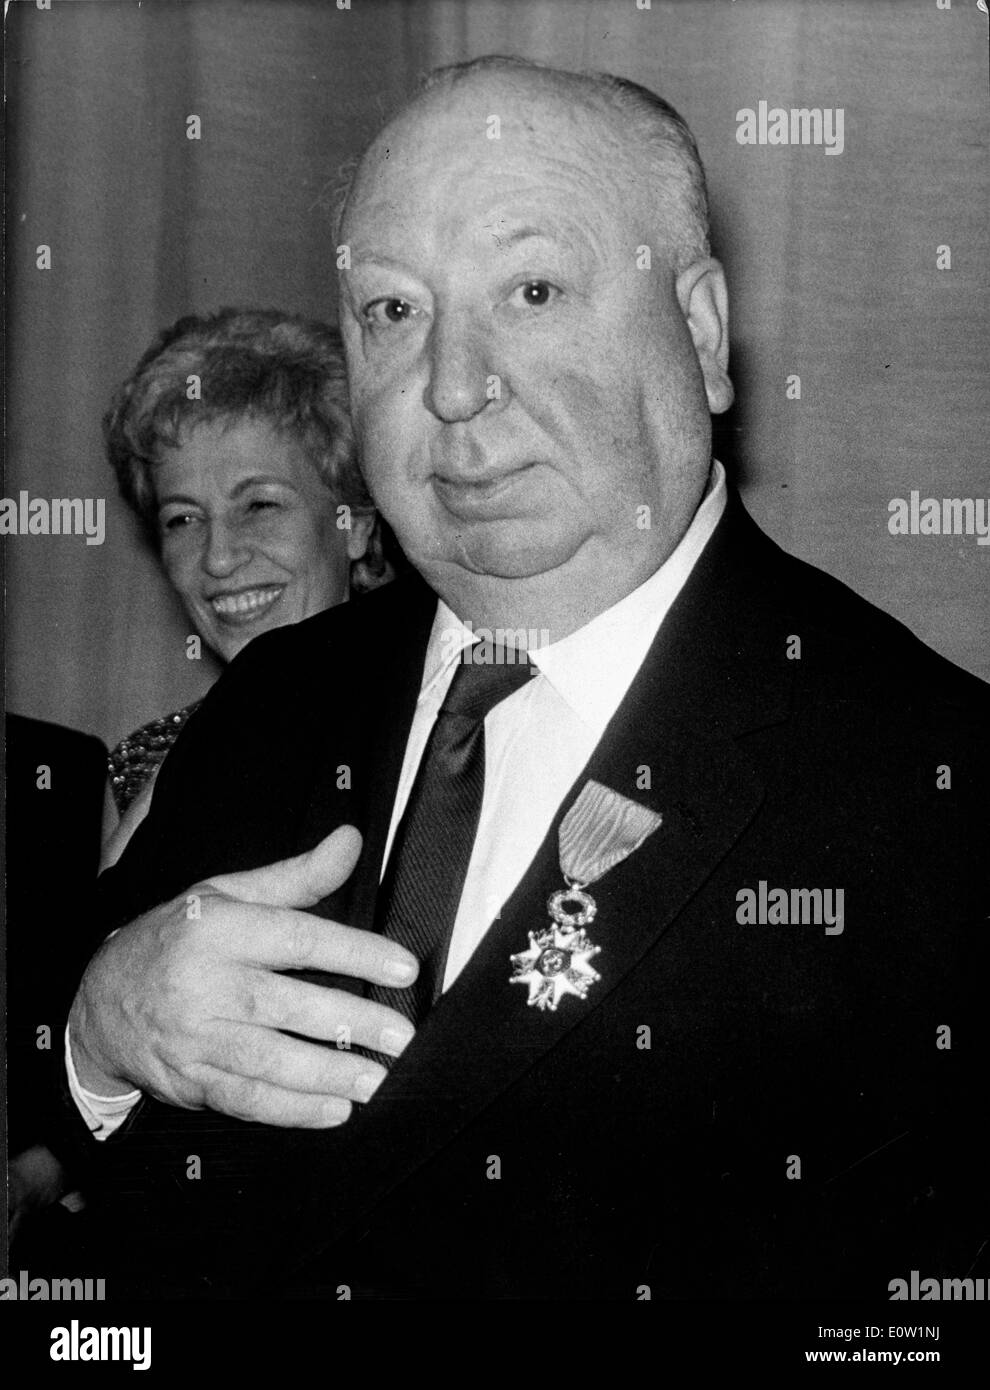 Film Director Alfred Hitchcock wearing a medal to an event Stock Photo